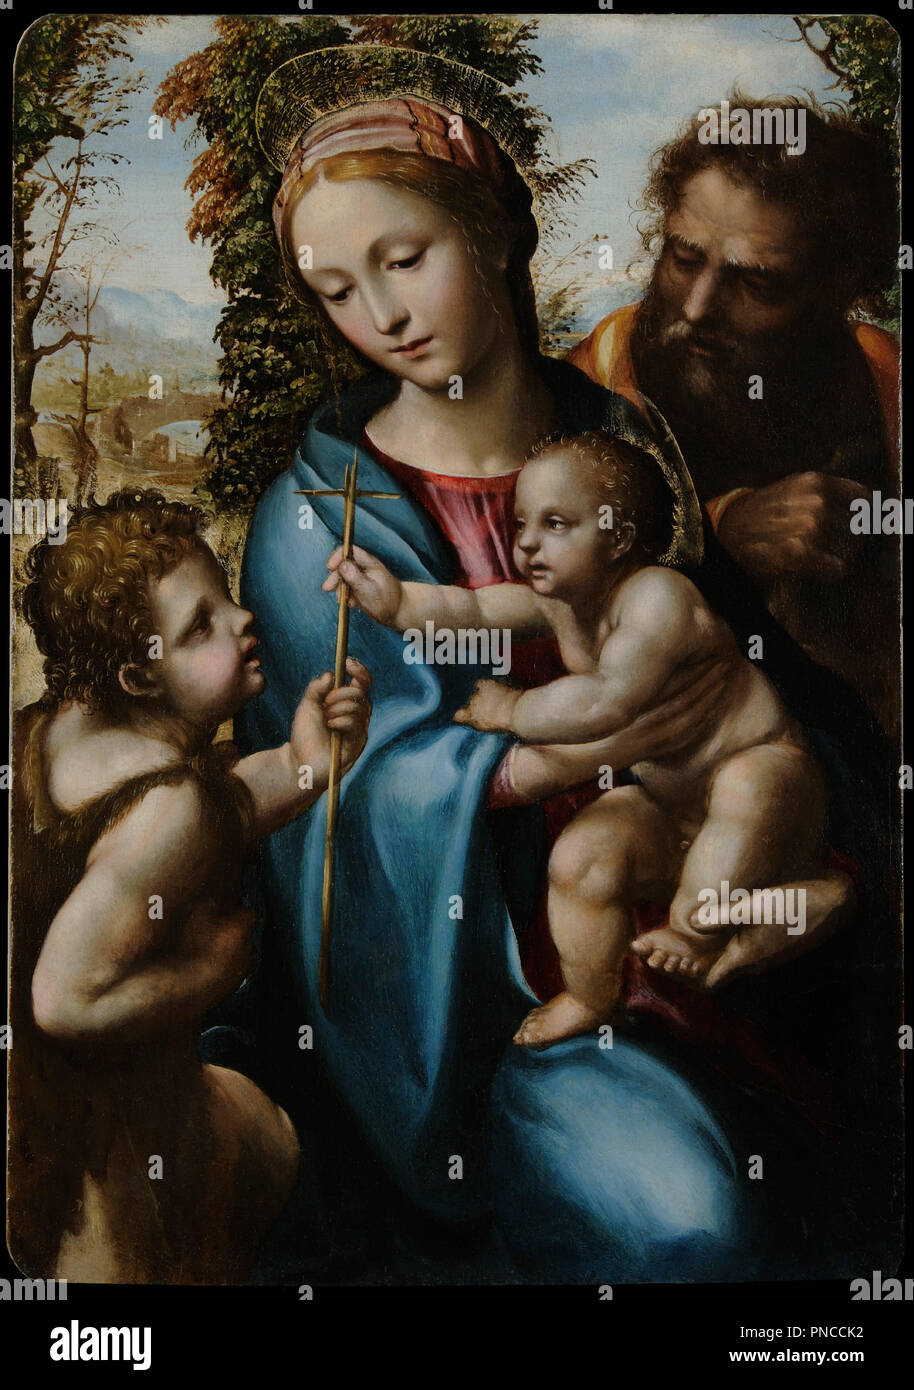 Holy Family with Young Saint John. Date/Period: 1525 - 1527. Painting. Oil on panel. Height: 70 mm (2.75 in); Width: 47 mm (1.85 in). Author: Giovanni Antonio Bazzi known as 'Sodoma'. SODOMA. Stock Photo